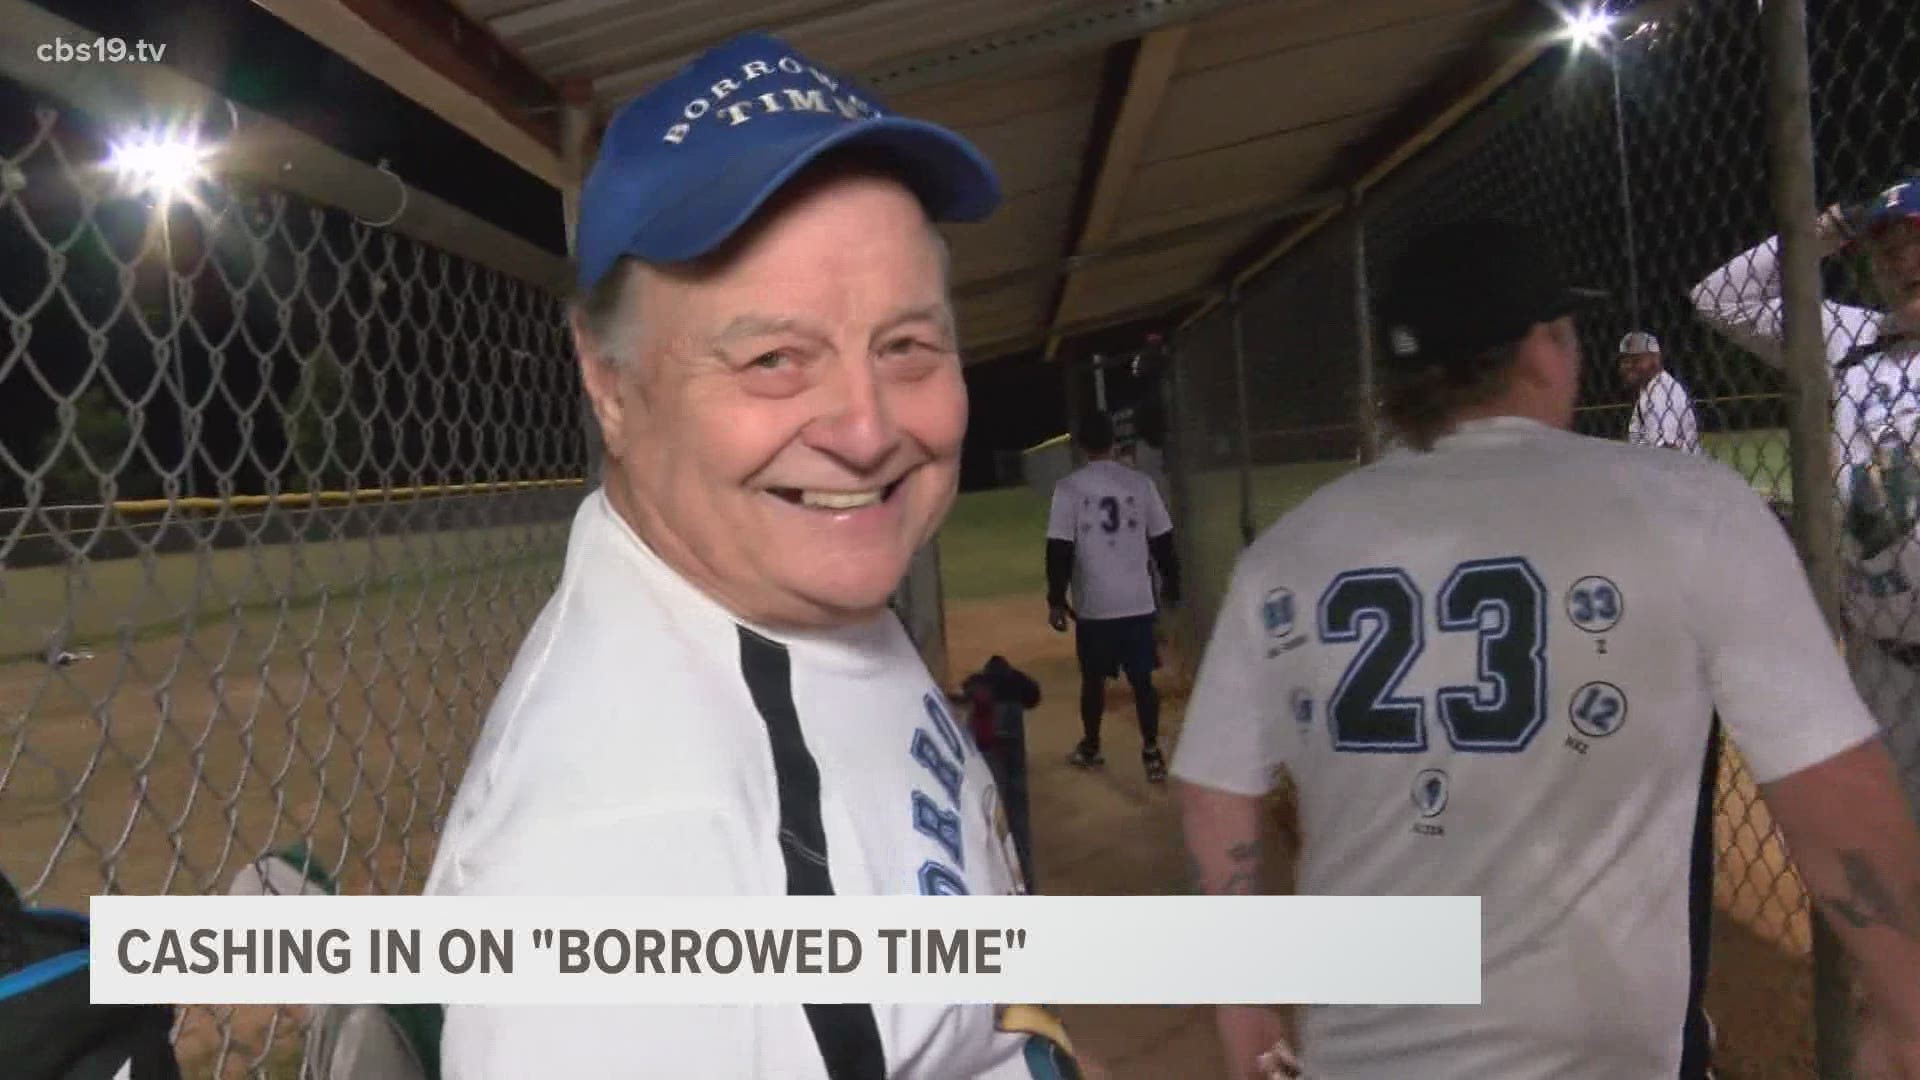 82 year old Terry Weiss has played organized softball in the City of Tyler for 50 years now, and he continues to cash in on "Borrowed Time"